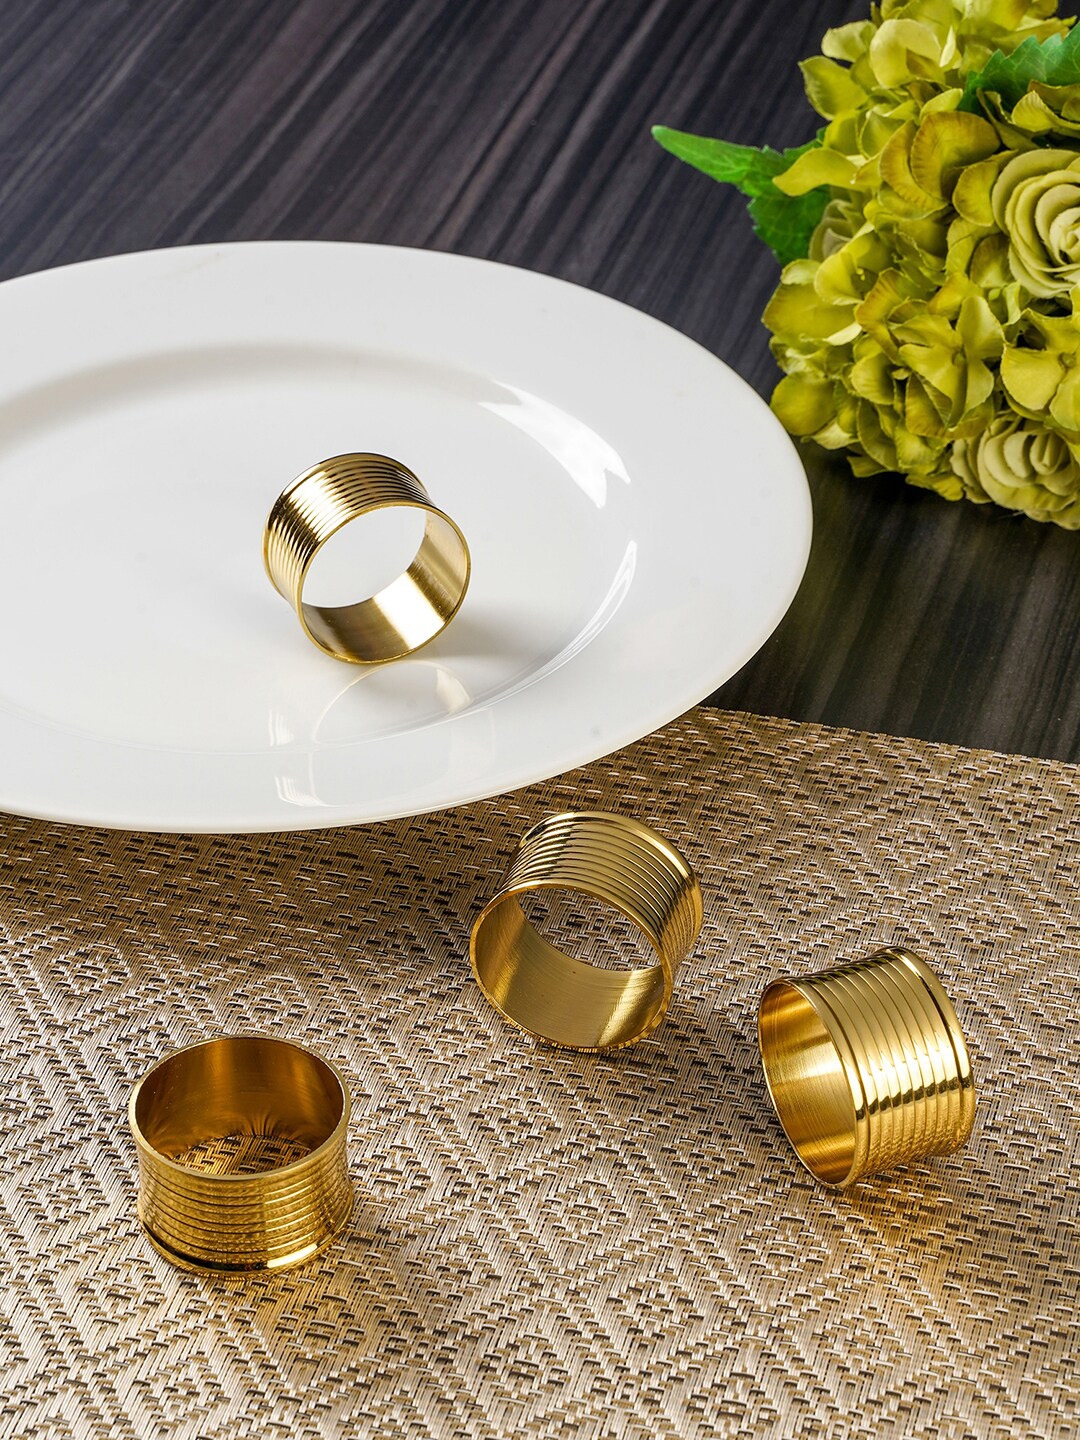 Pure Home and Living Set of 4 Gold-Toned Brass Napkin Rings